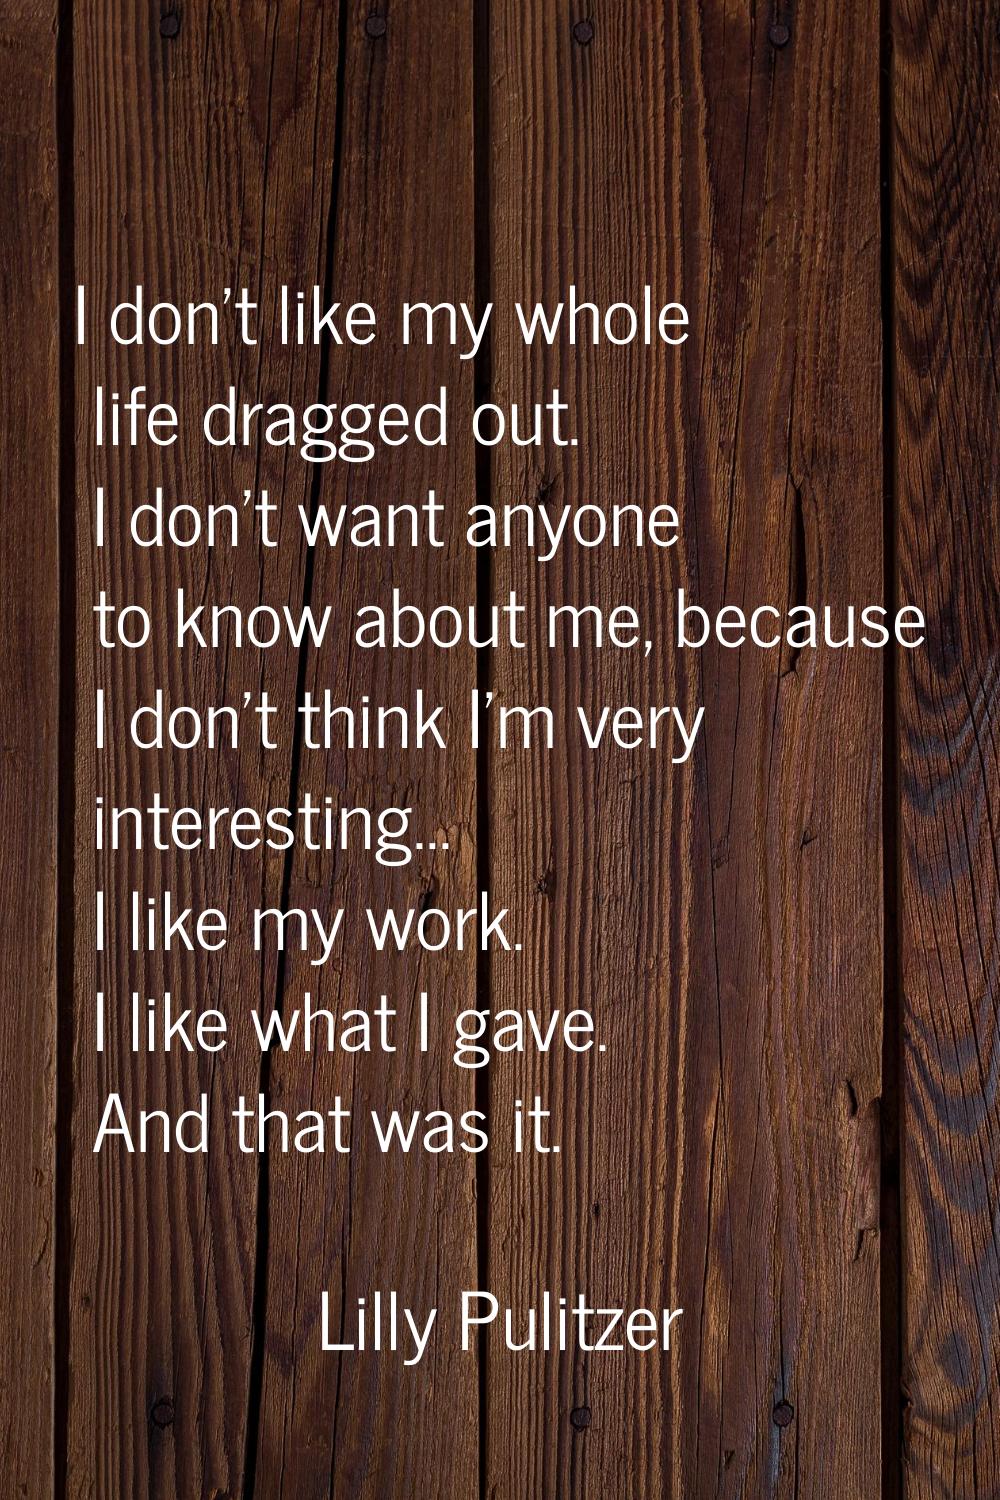 I don't like my whole life dragged out. I don't want anyone to know about me, because I don't think